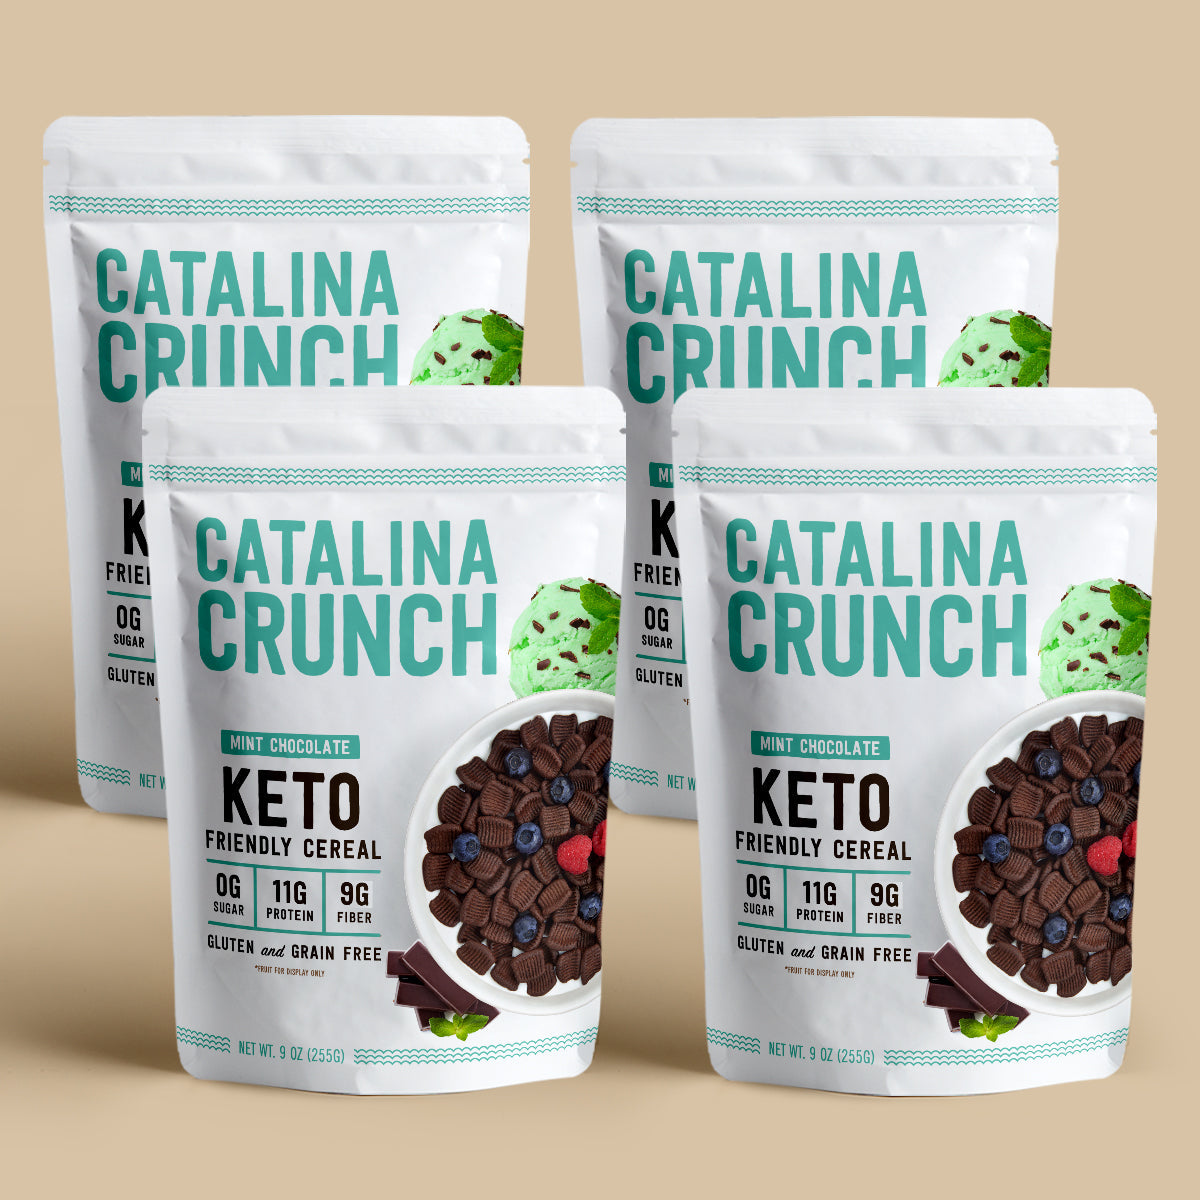 [Catalina Crunch] Mint Chocolate Chip Keto Cereal | 252g | 1 bag